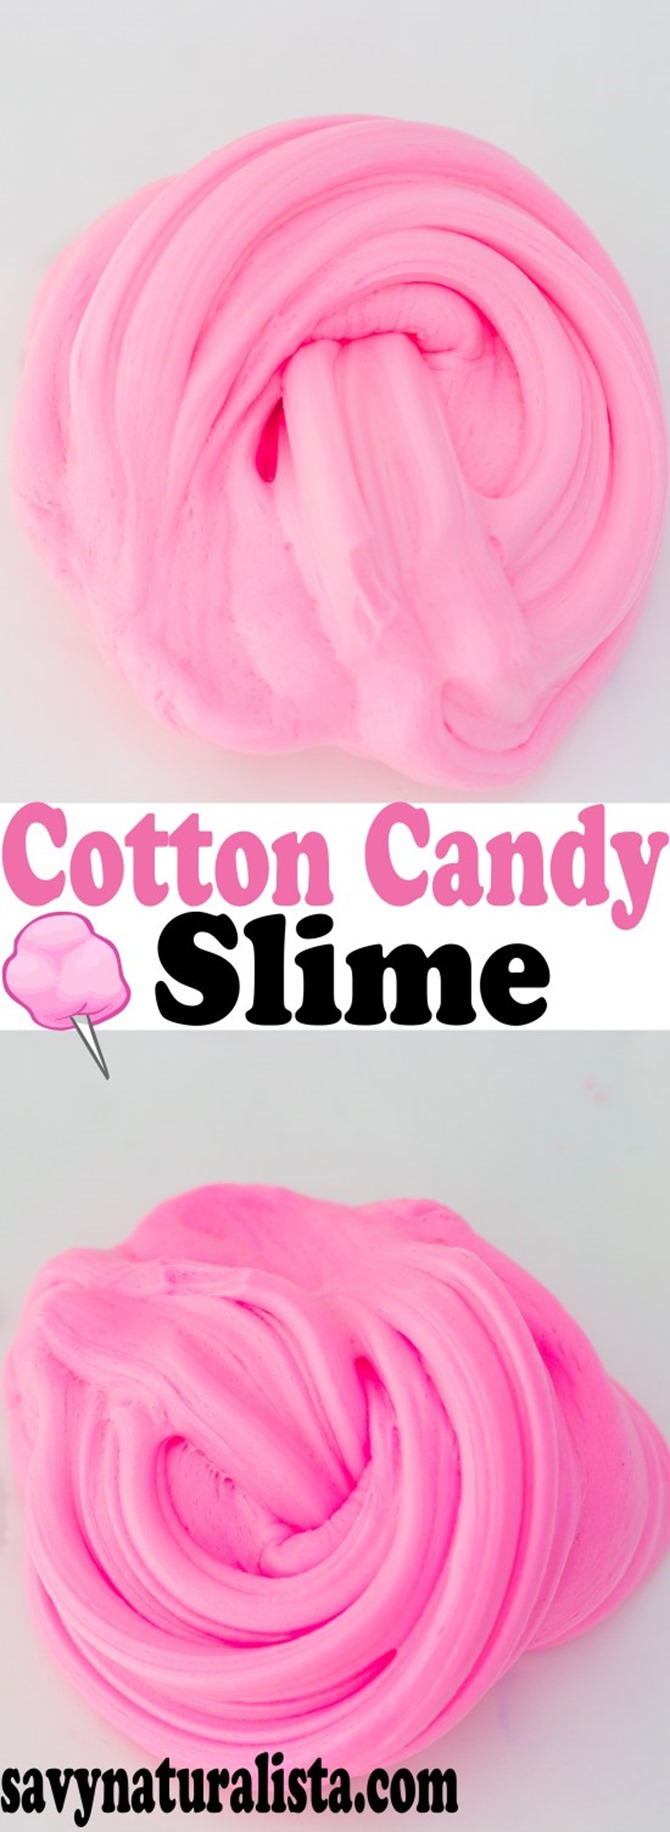 12 DIY Slime Recipes - Cotton Candy